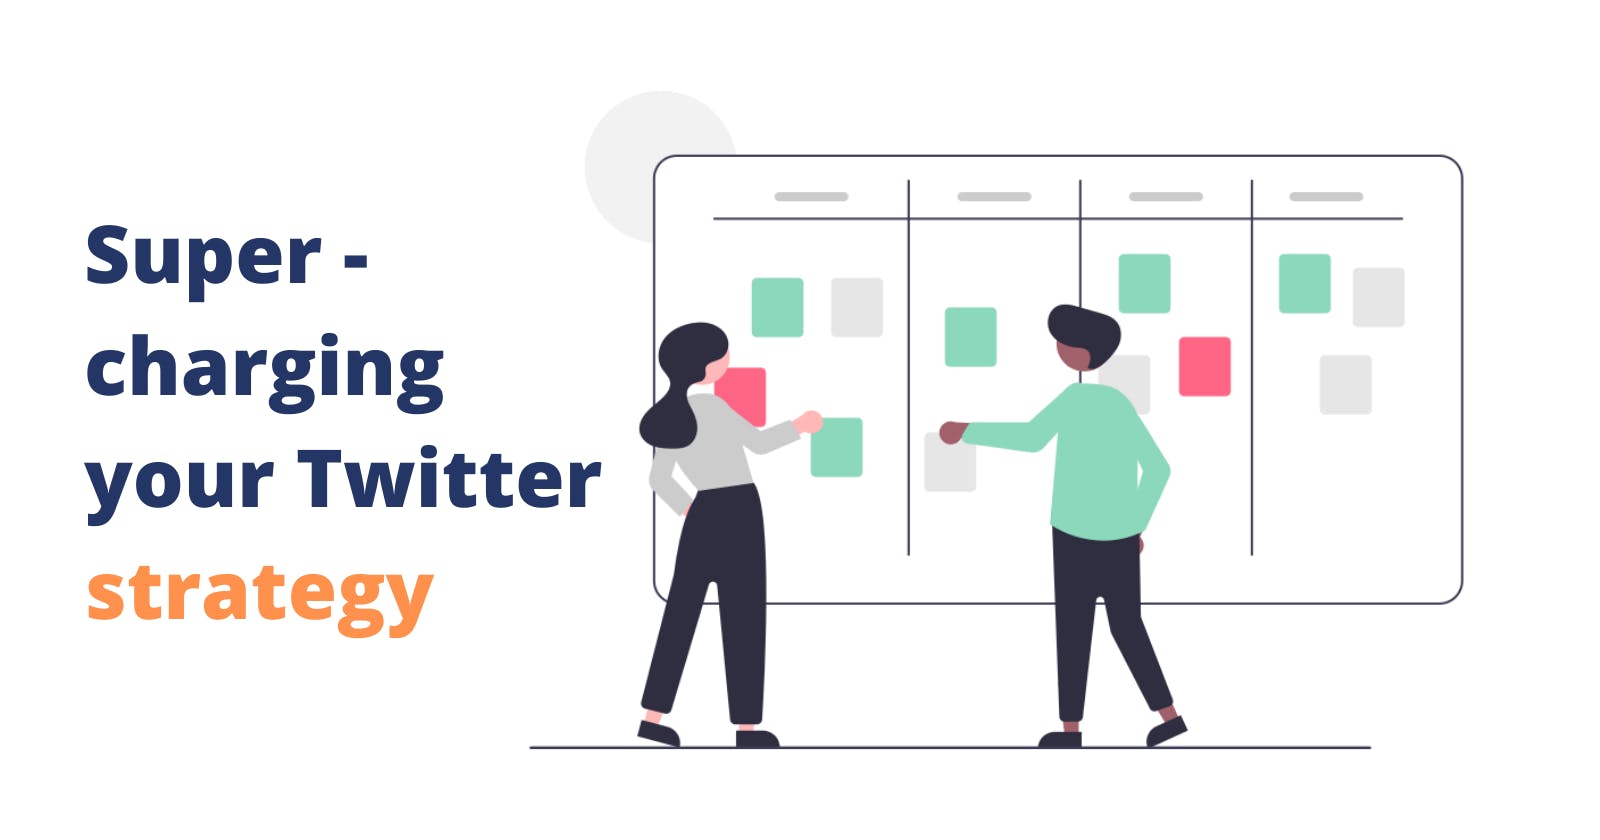 Supercharging your Twitter strategy 🚀